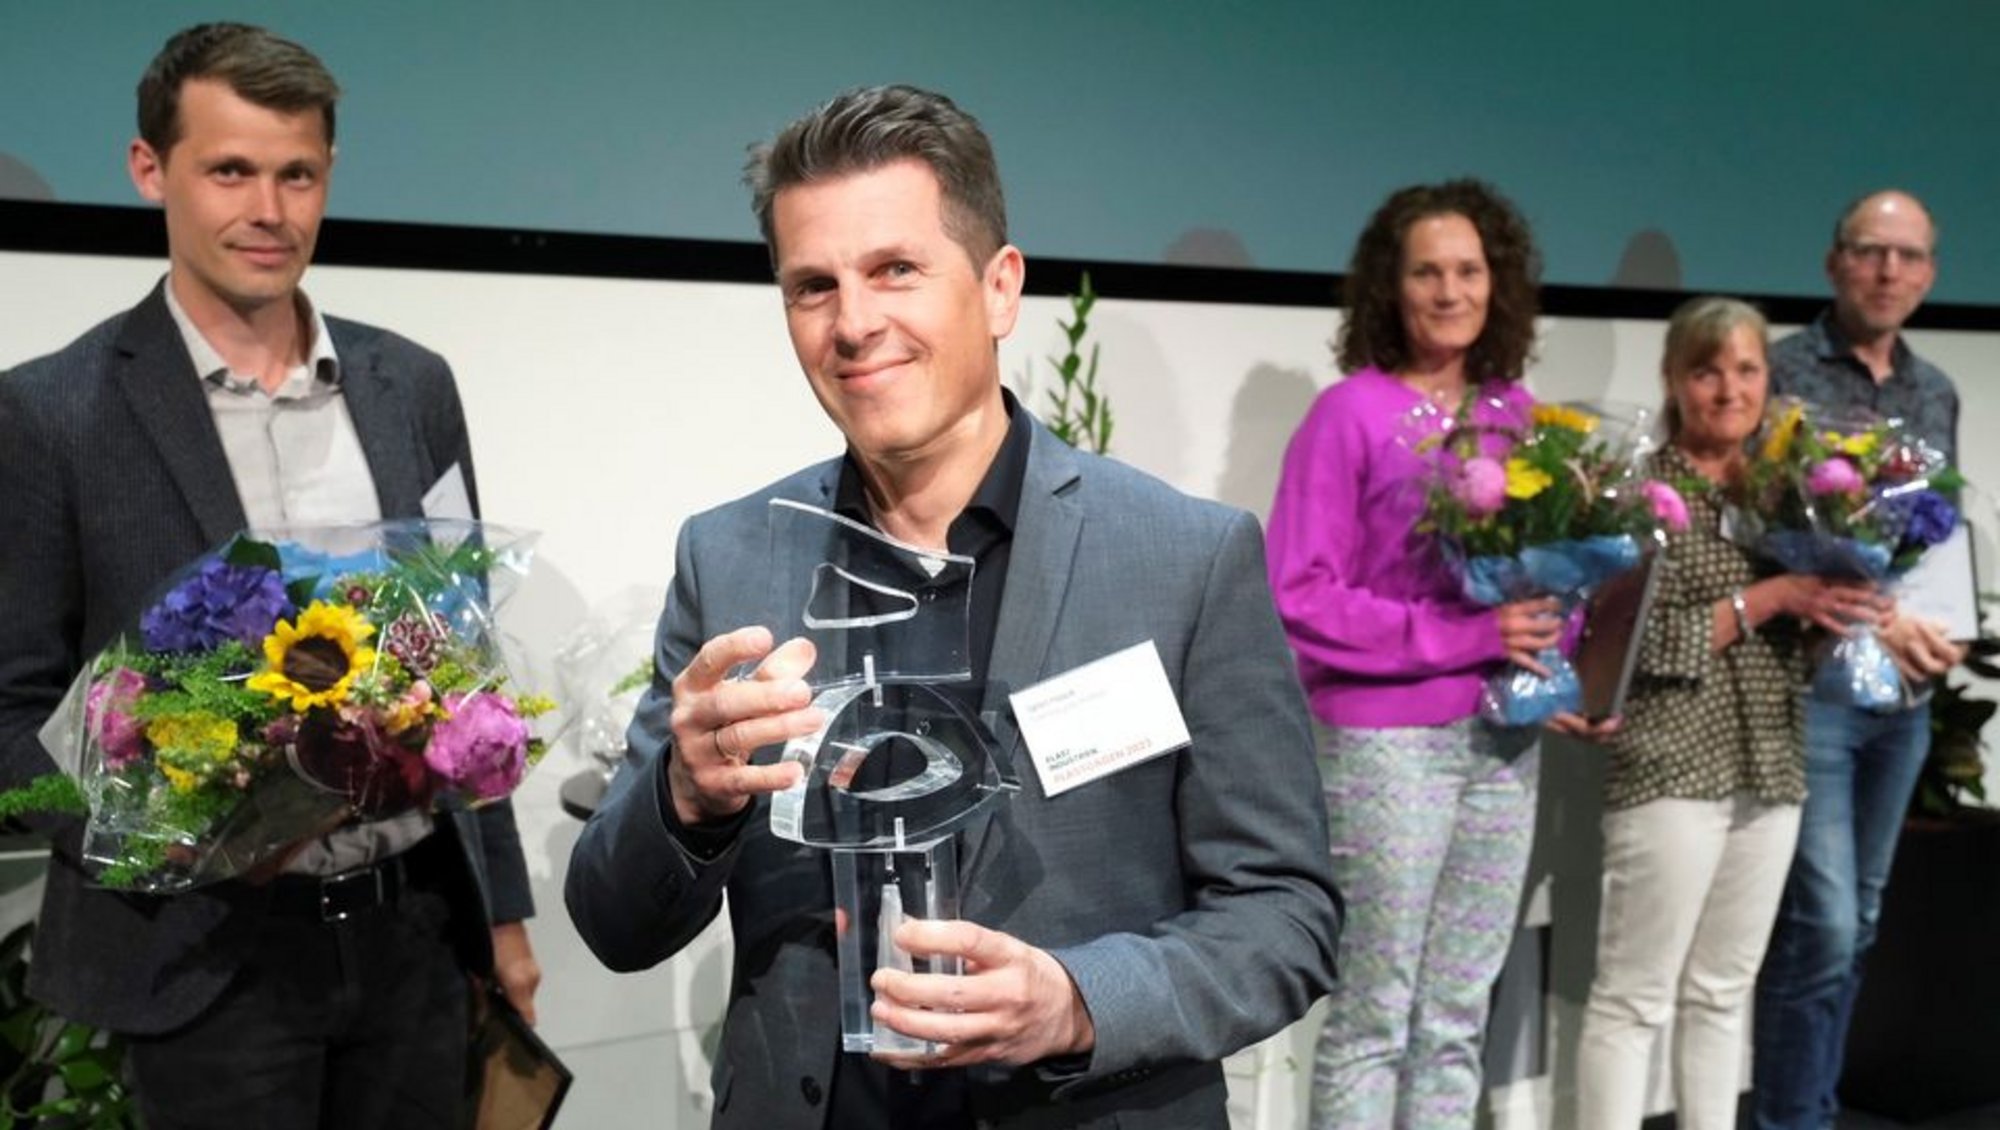 Aarhus University is a partner in the CETEC project, which receives Plastprisen 2023. On behalf of the CETEC project, Søren Haack, Project Manager at CETEC-partner Danish Technological Institute, was presented the award at Plastindustrien’s anniversary on 25 May. Photo: Plastindustrien